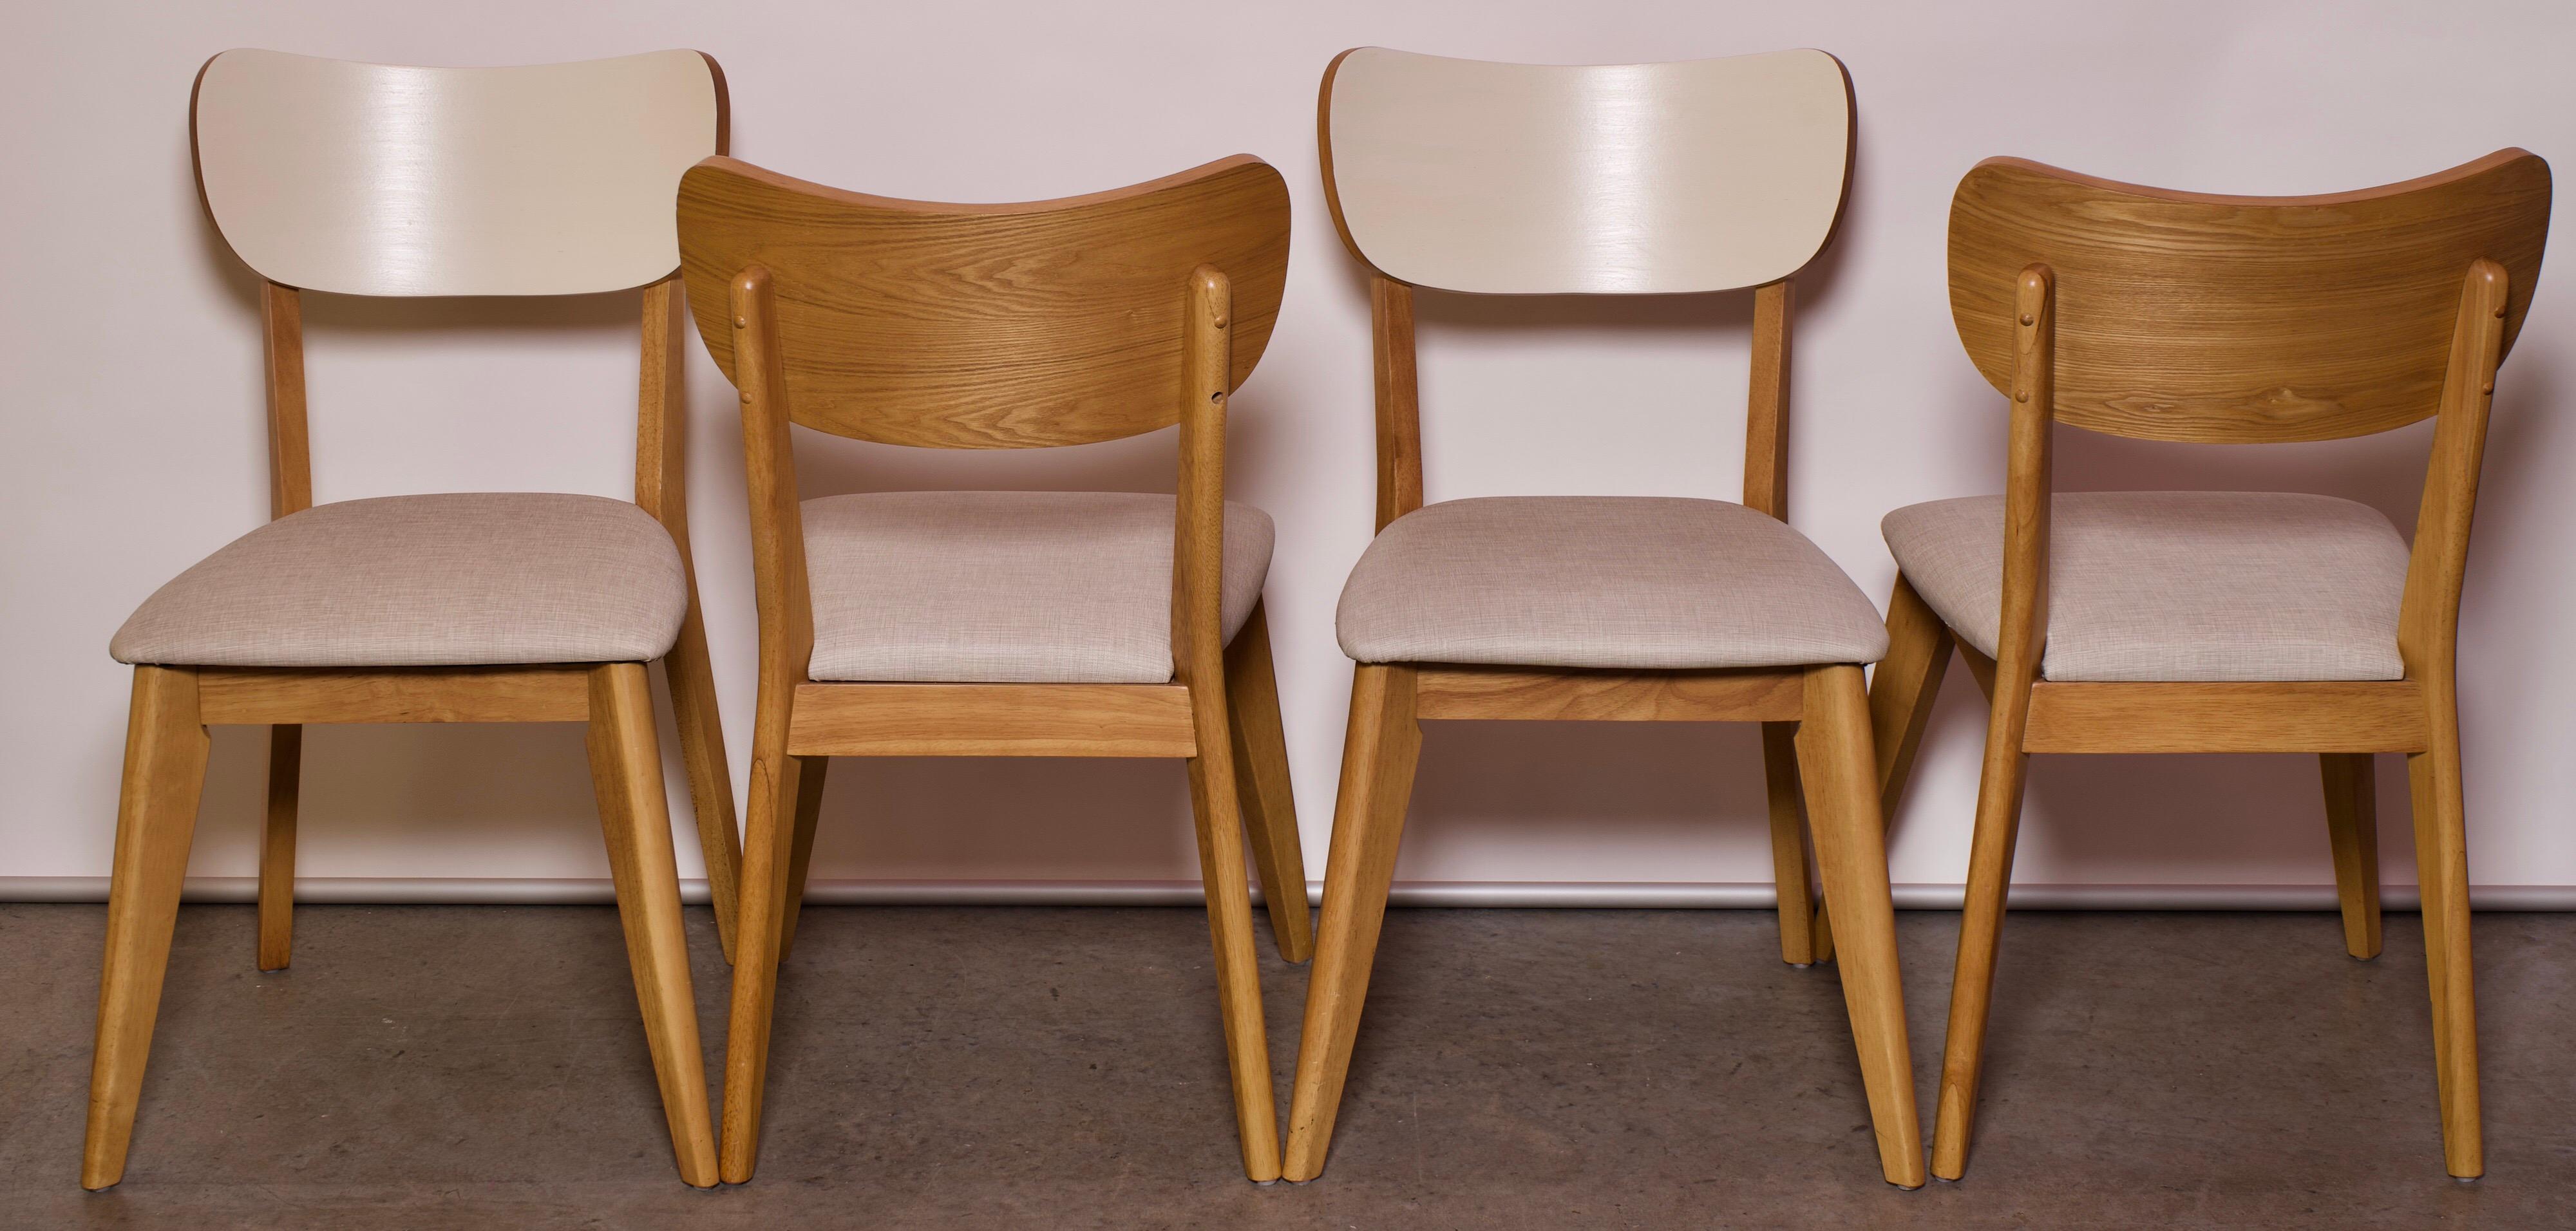 American 1960s Vintage Contemporary Birch and Vinyl Dining Chairs, Set of 4